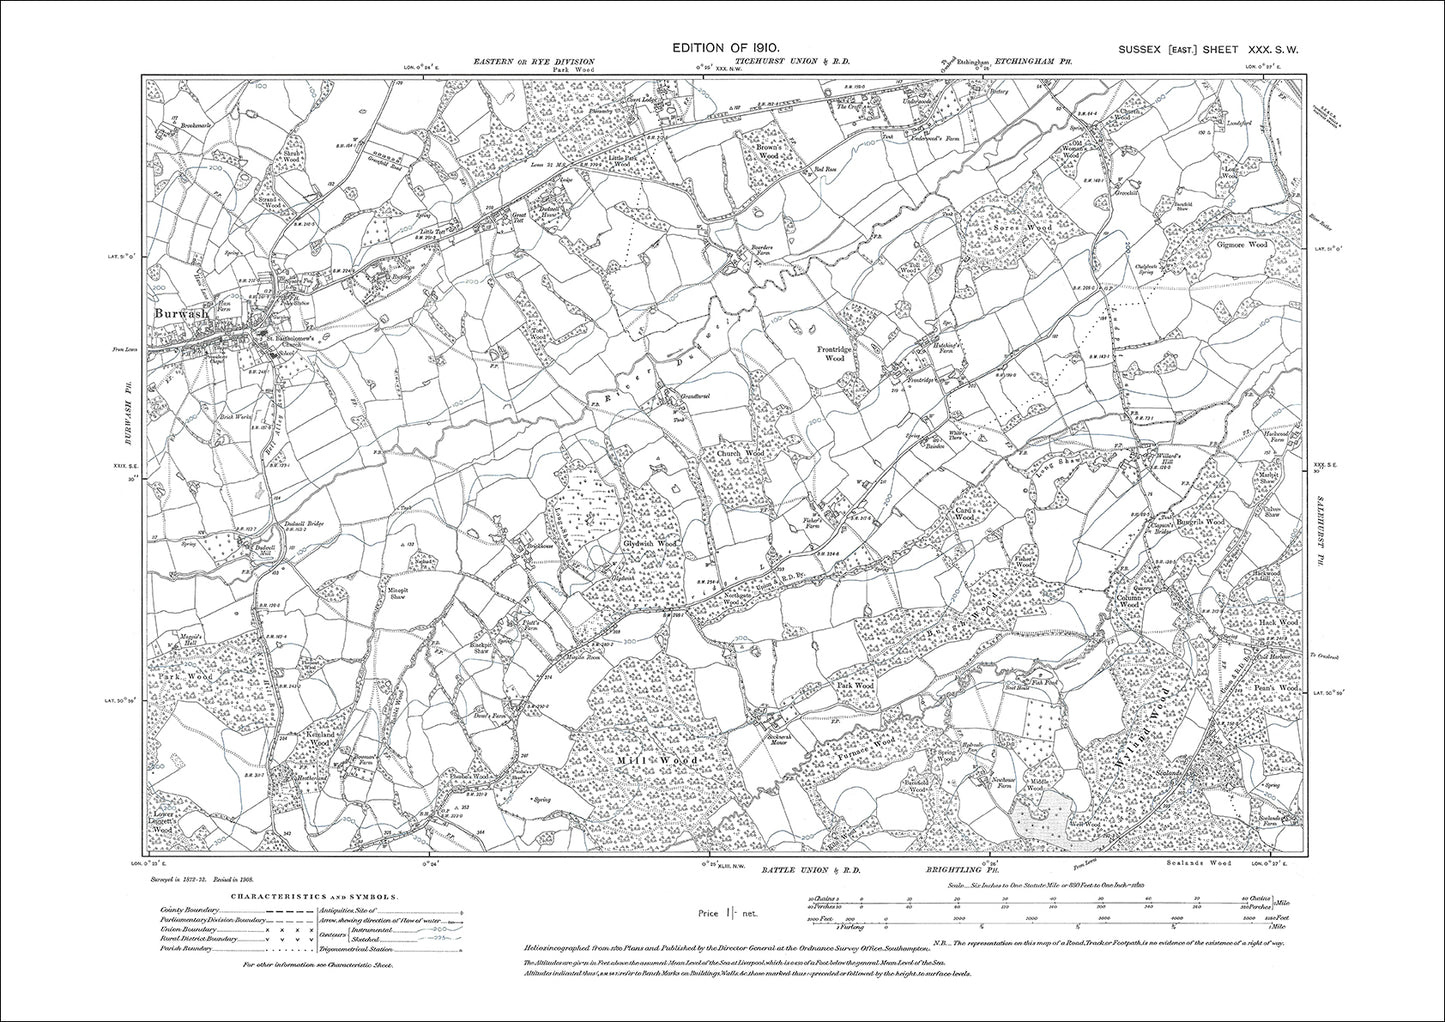 Burwash, Etchingham (south), old map Sussex 1910: 30SW